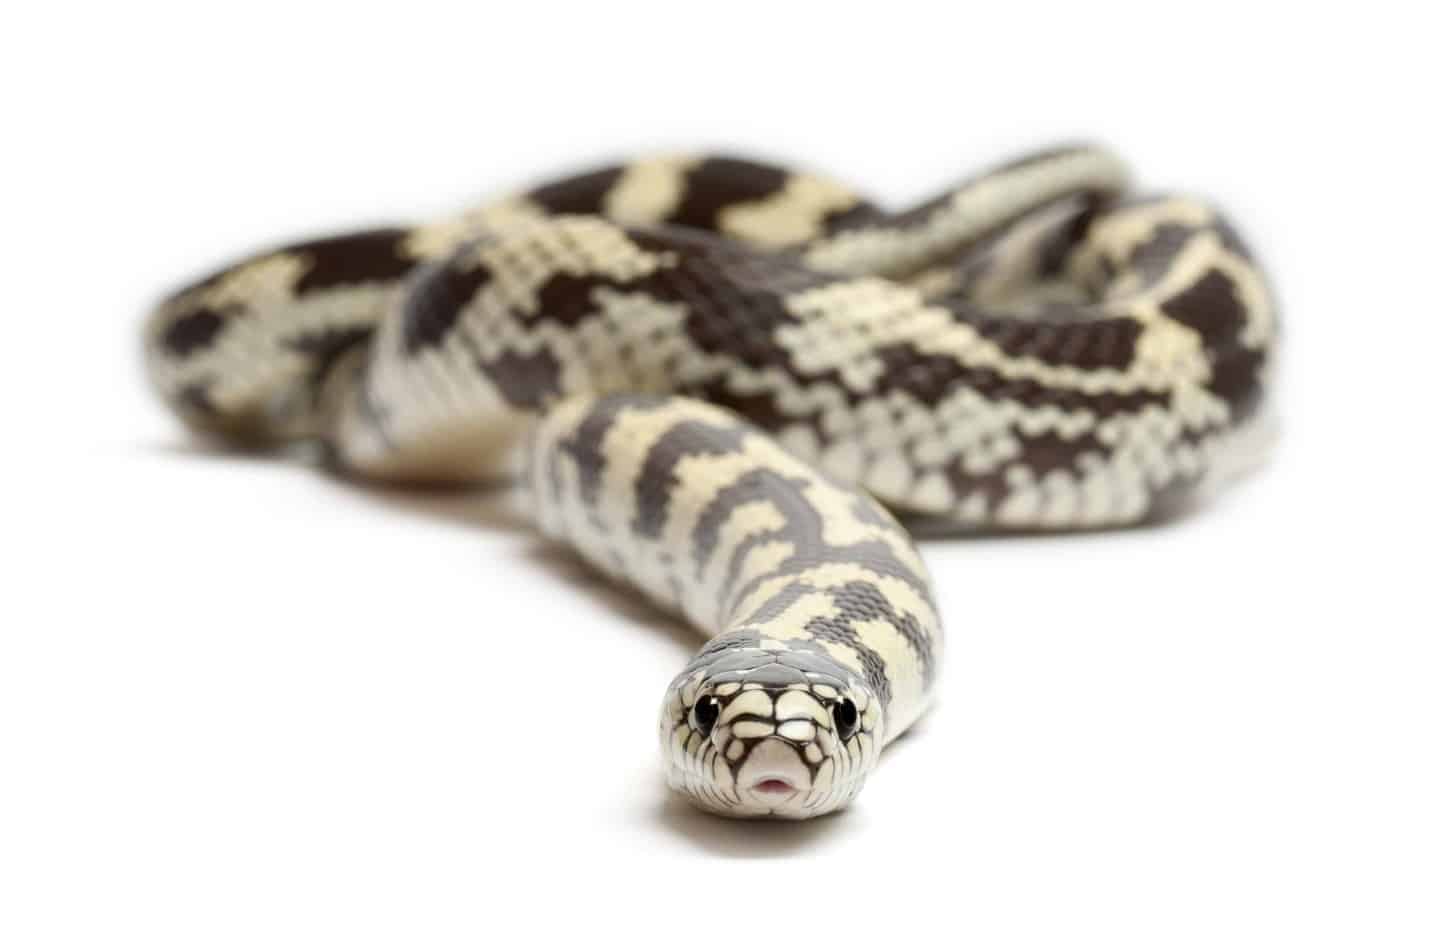 Kingsnakes As Pets A Complete Guide With Pictures Embora Pets - 